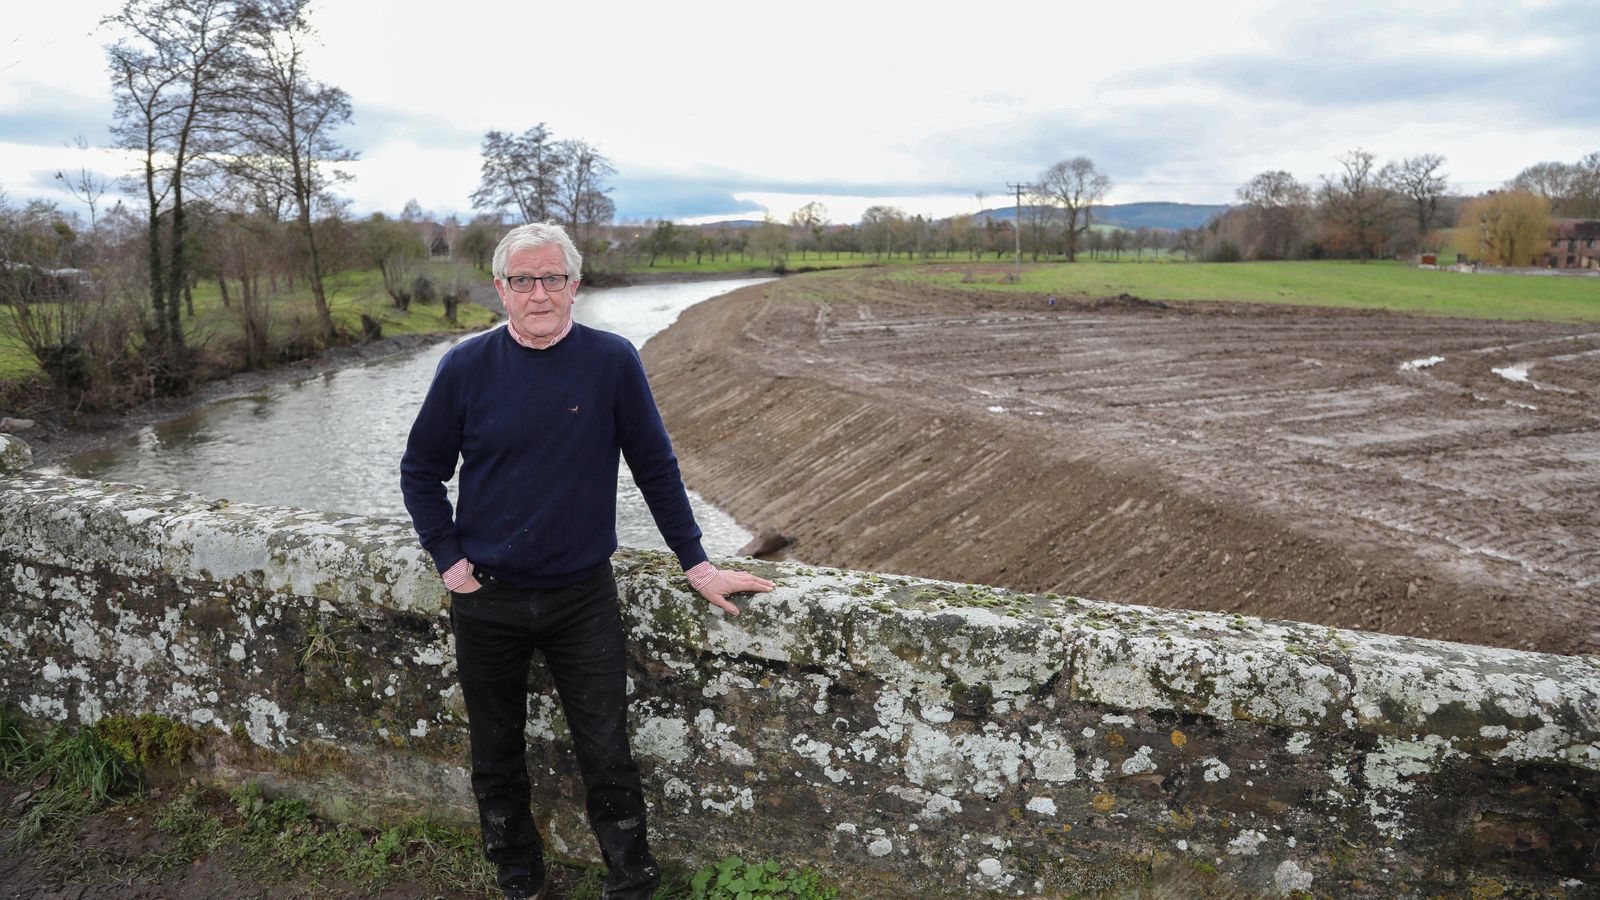 Farmer jailed for 'wanton destruction' of stretch of Herefordshire river